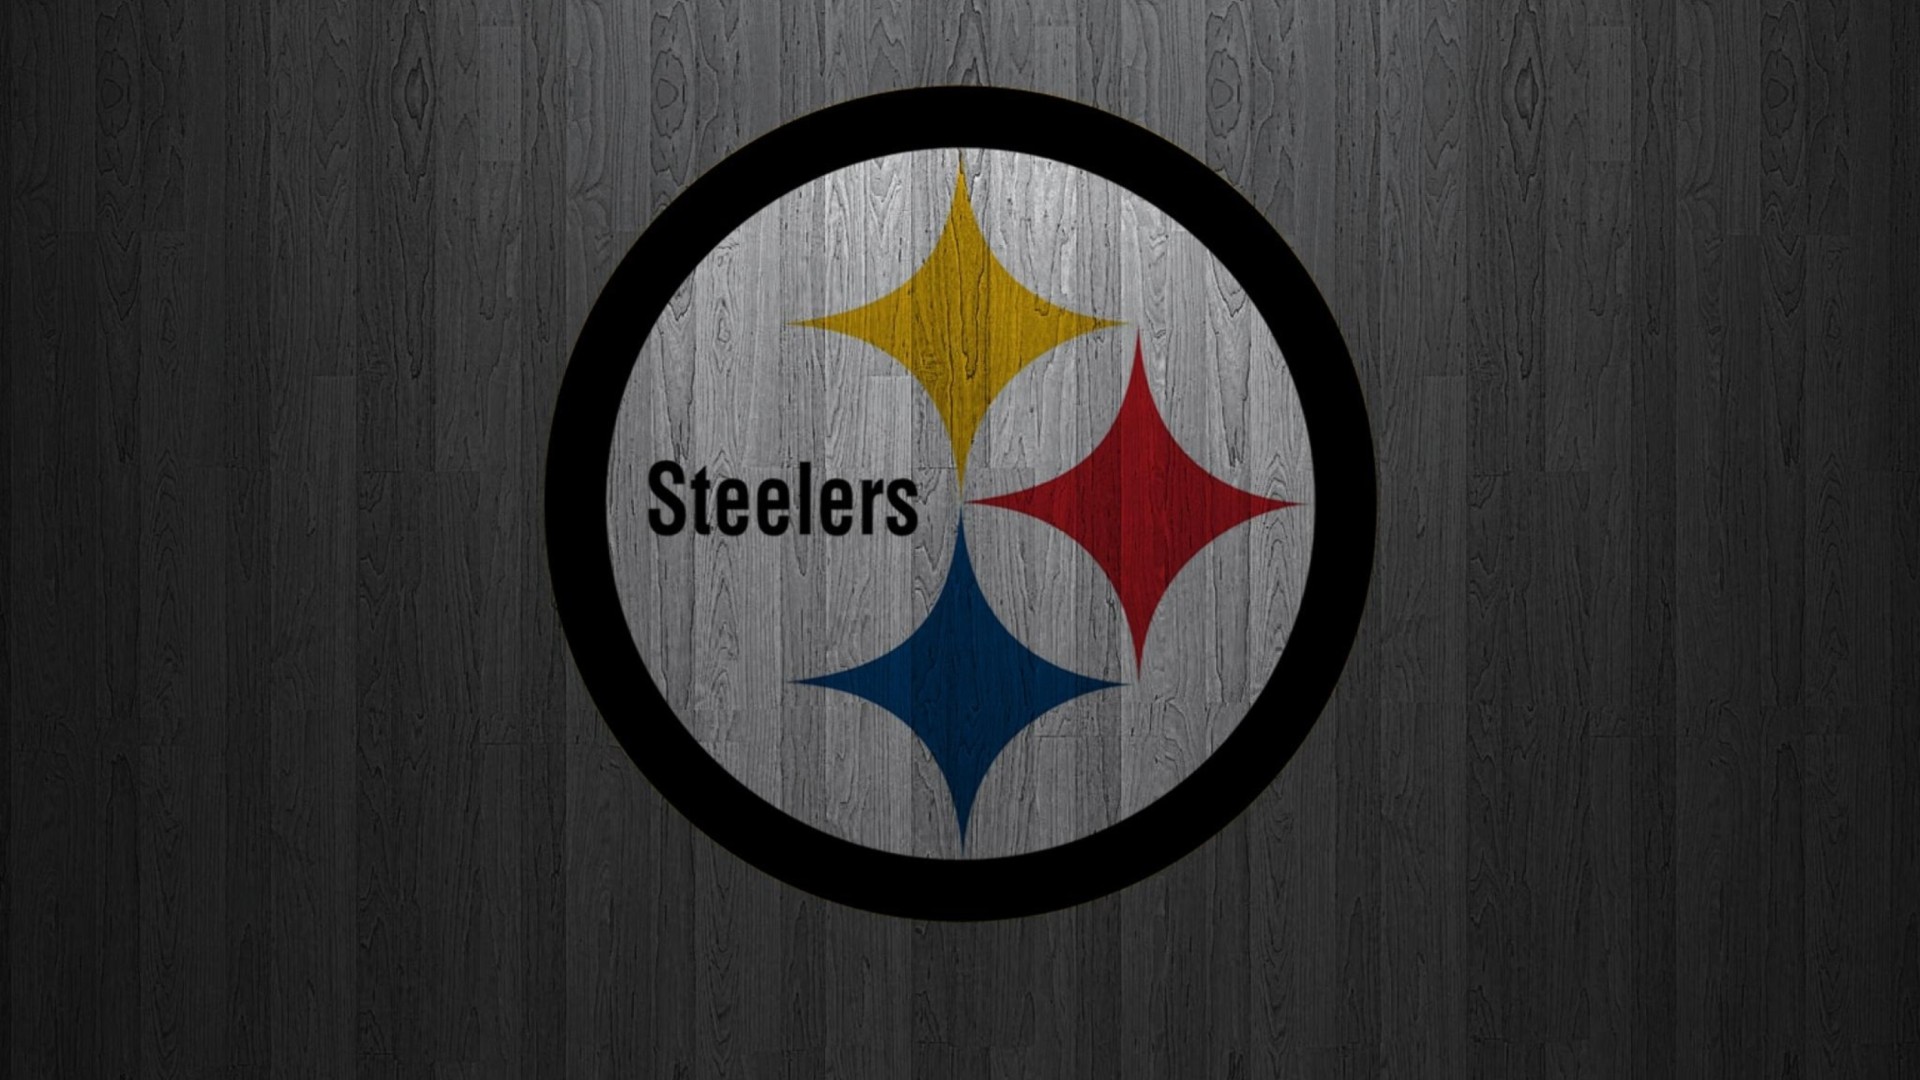 Steelers Logo HD Wallpapers With Resolution 1920X1080 pixel. You can make this wallpaper for your Mac or Windows Desktop Background, iPhone, Android or Tablet and another Smartphone device for free